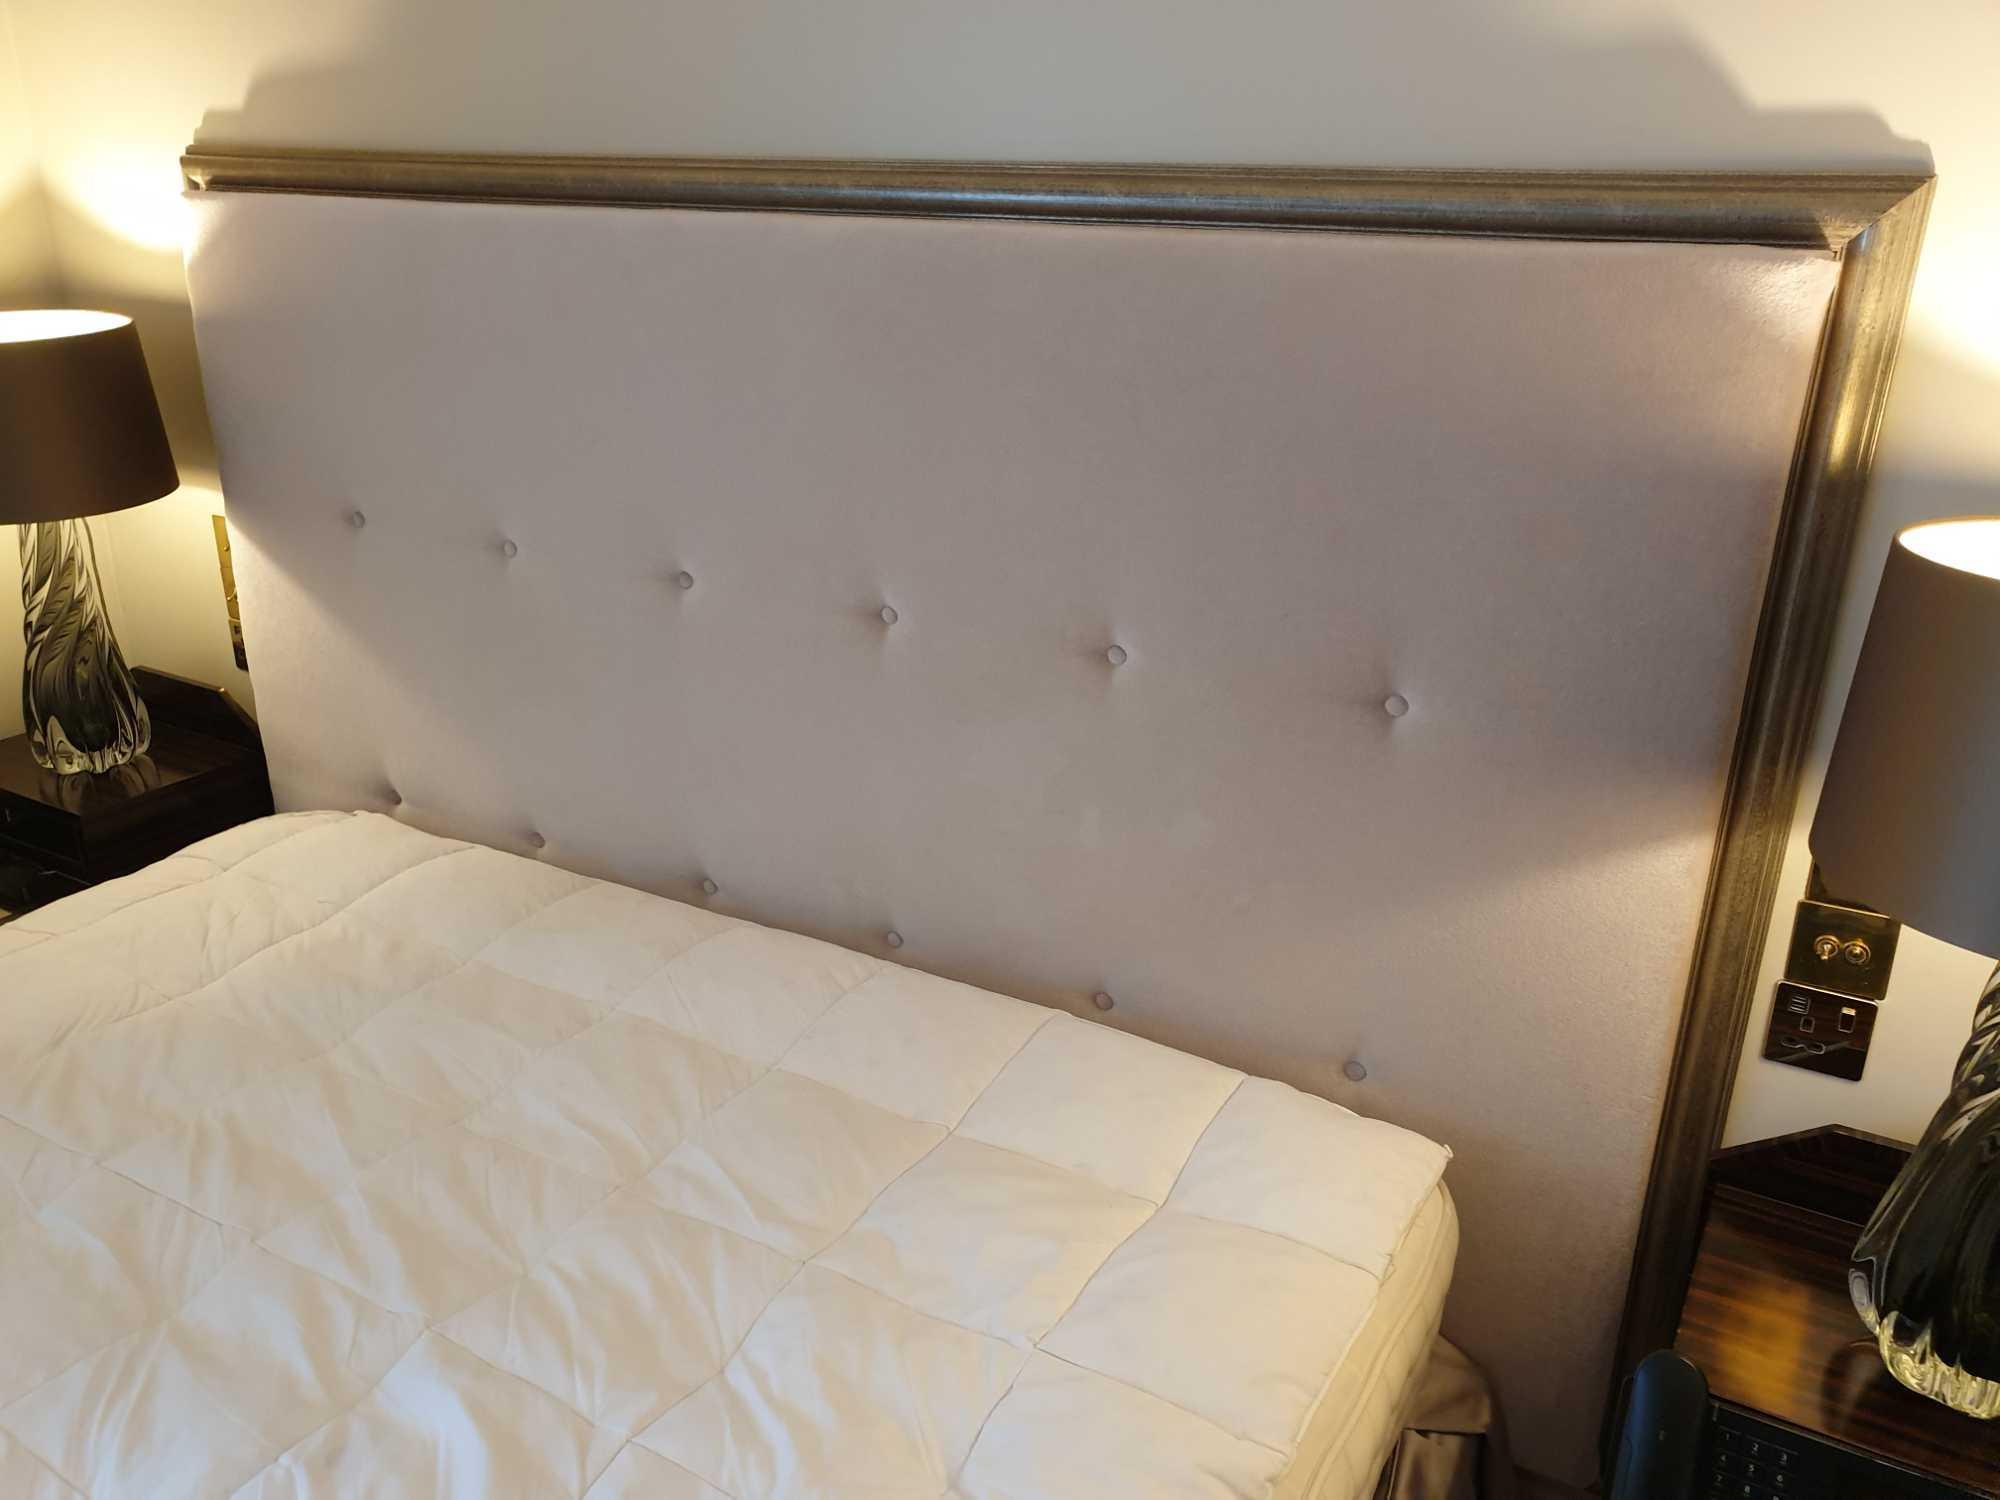 Headboard, Handcrafted With Nail Trim And Padded Textured Woven Upholstery (Room 323 324) (This - Image 2 of 2